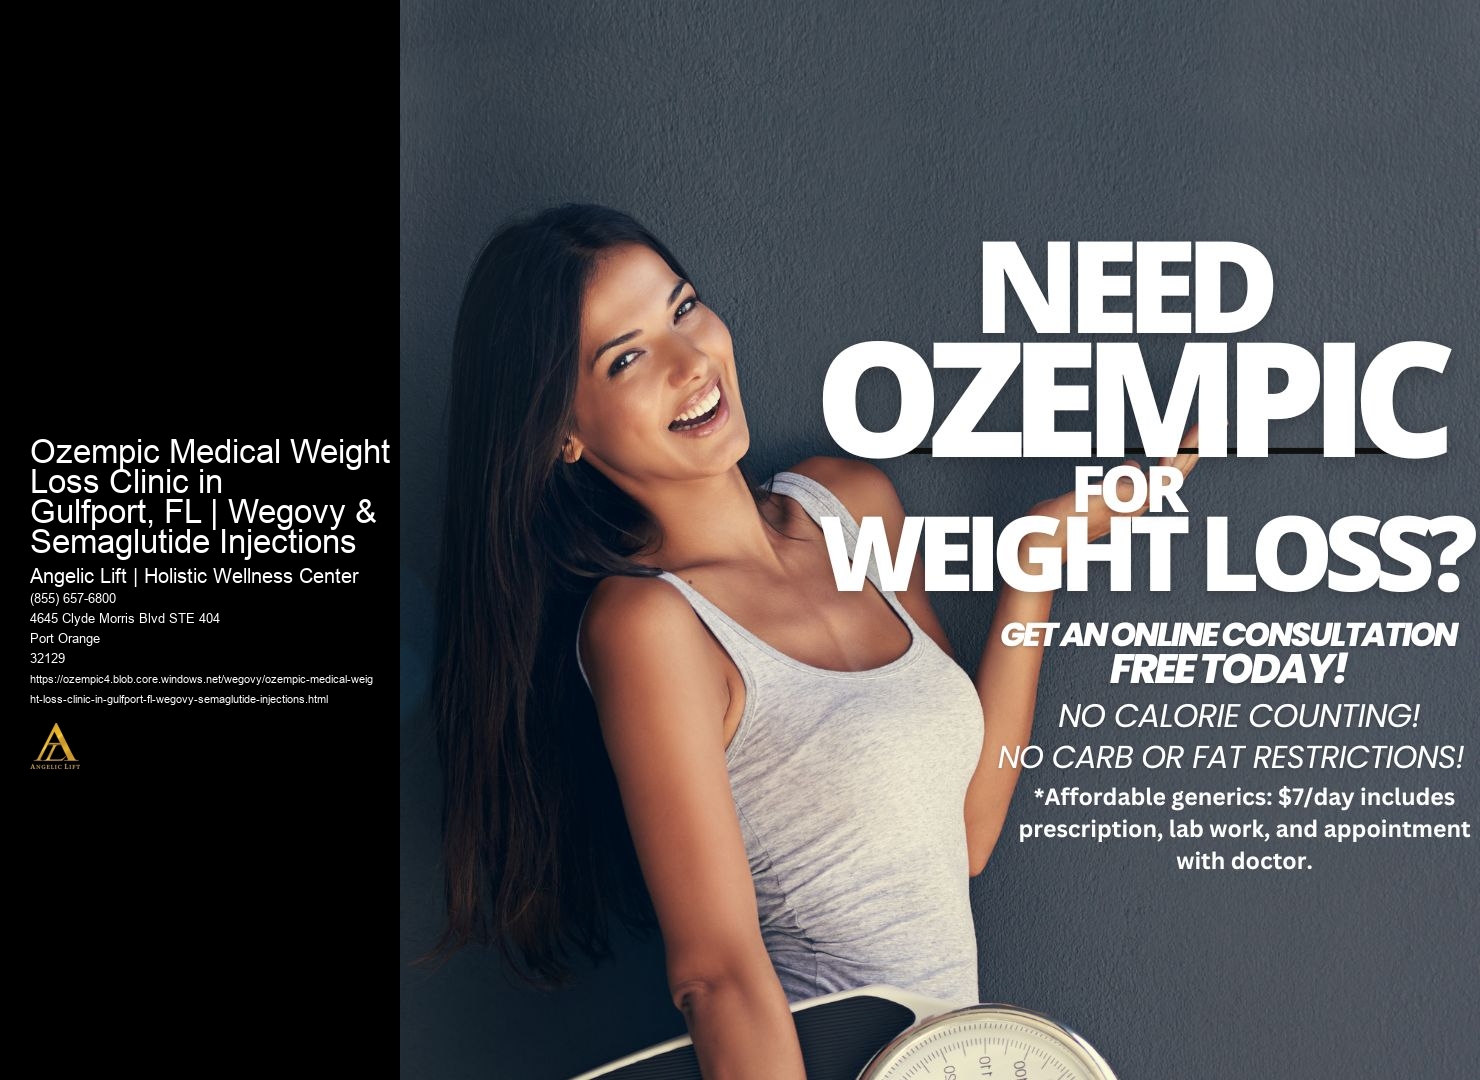 Ozempic Medical Weight Loss Clinic in Gulfport, FL | Wegovy & Semaglutide Injections